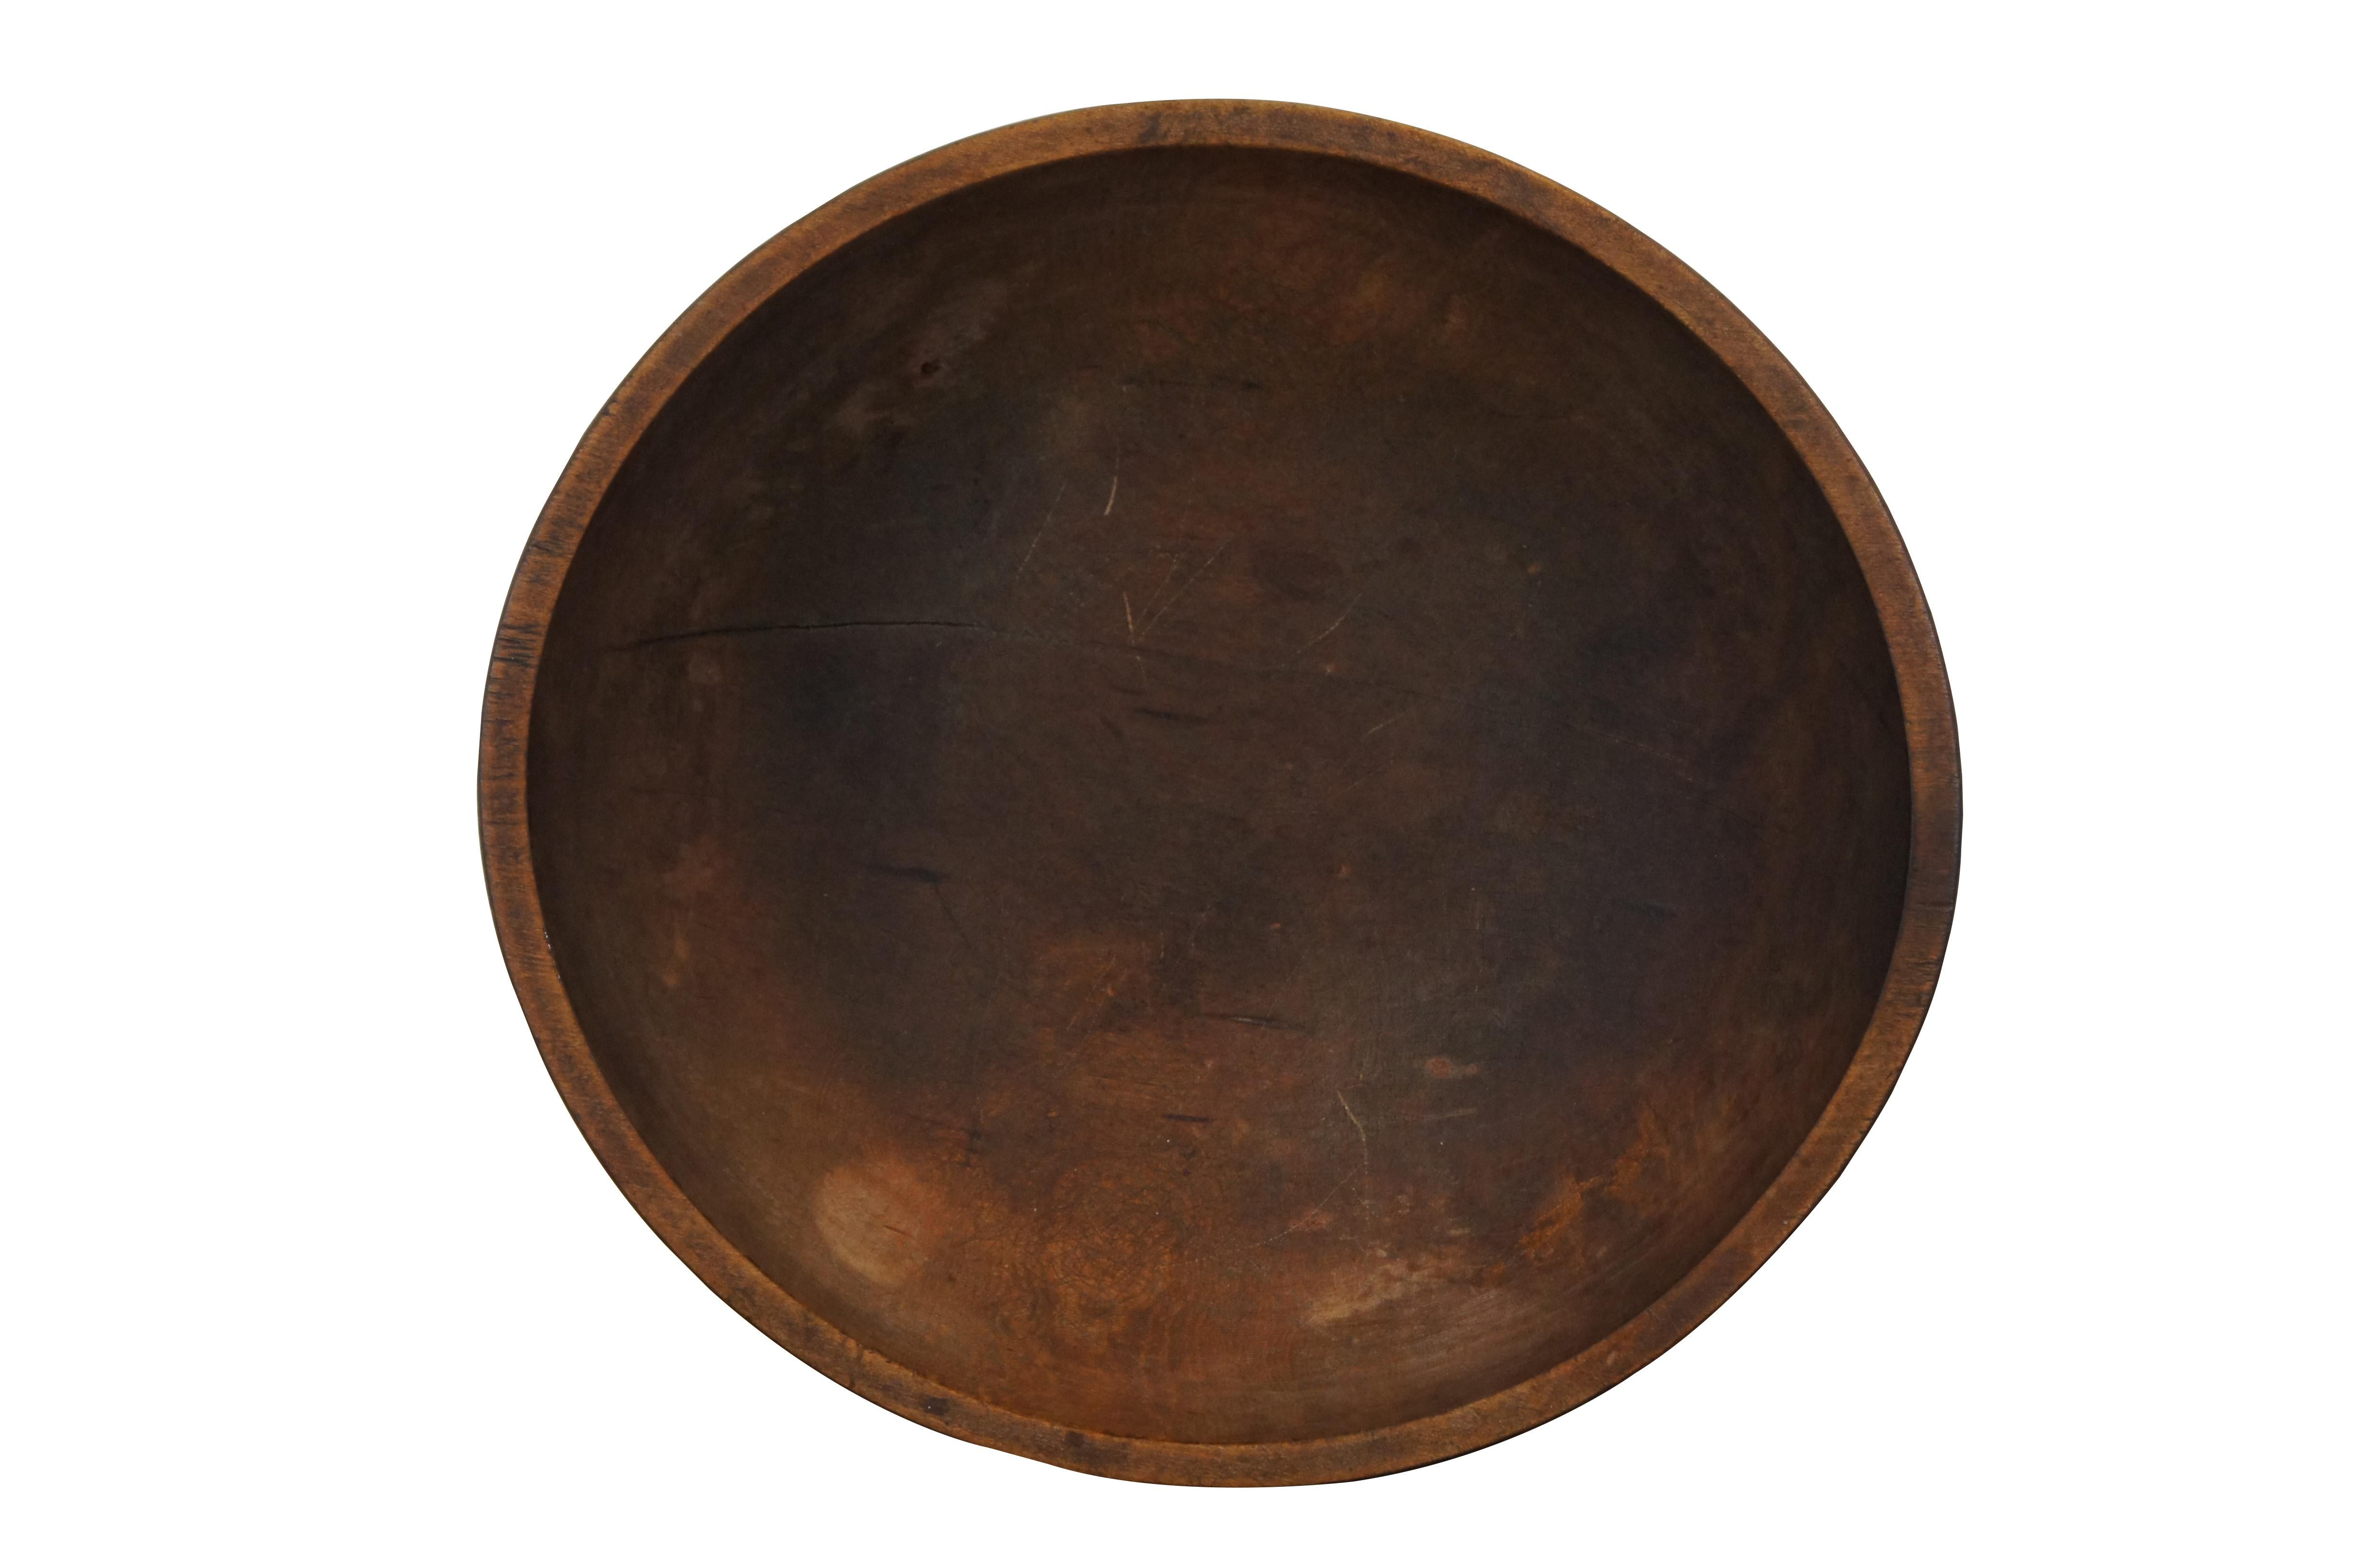 Large antique folk art country farmhouse dough mixing or centerpiece fruit bowl.  Made of turned maple wood featuring round form with banded lip.  

Dimensions:
17.5” x 16.5” x 5” (Width x Depth x Height)